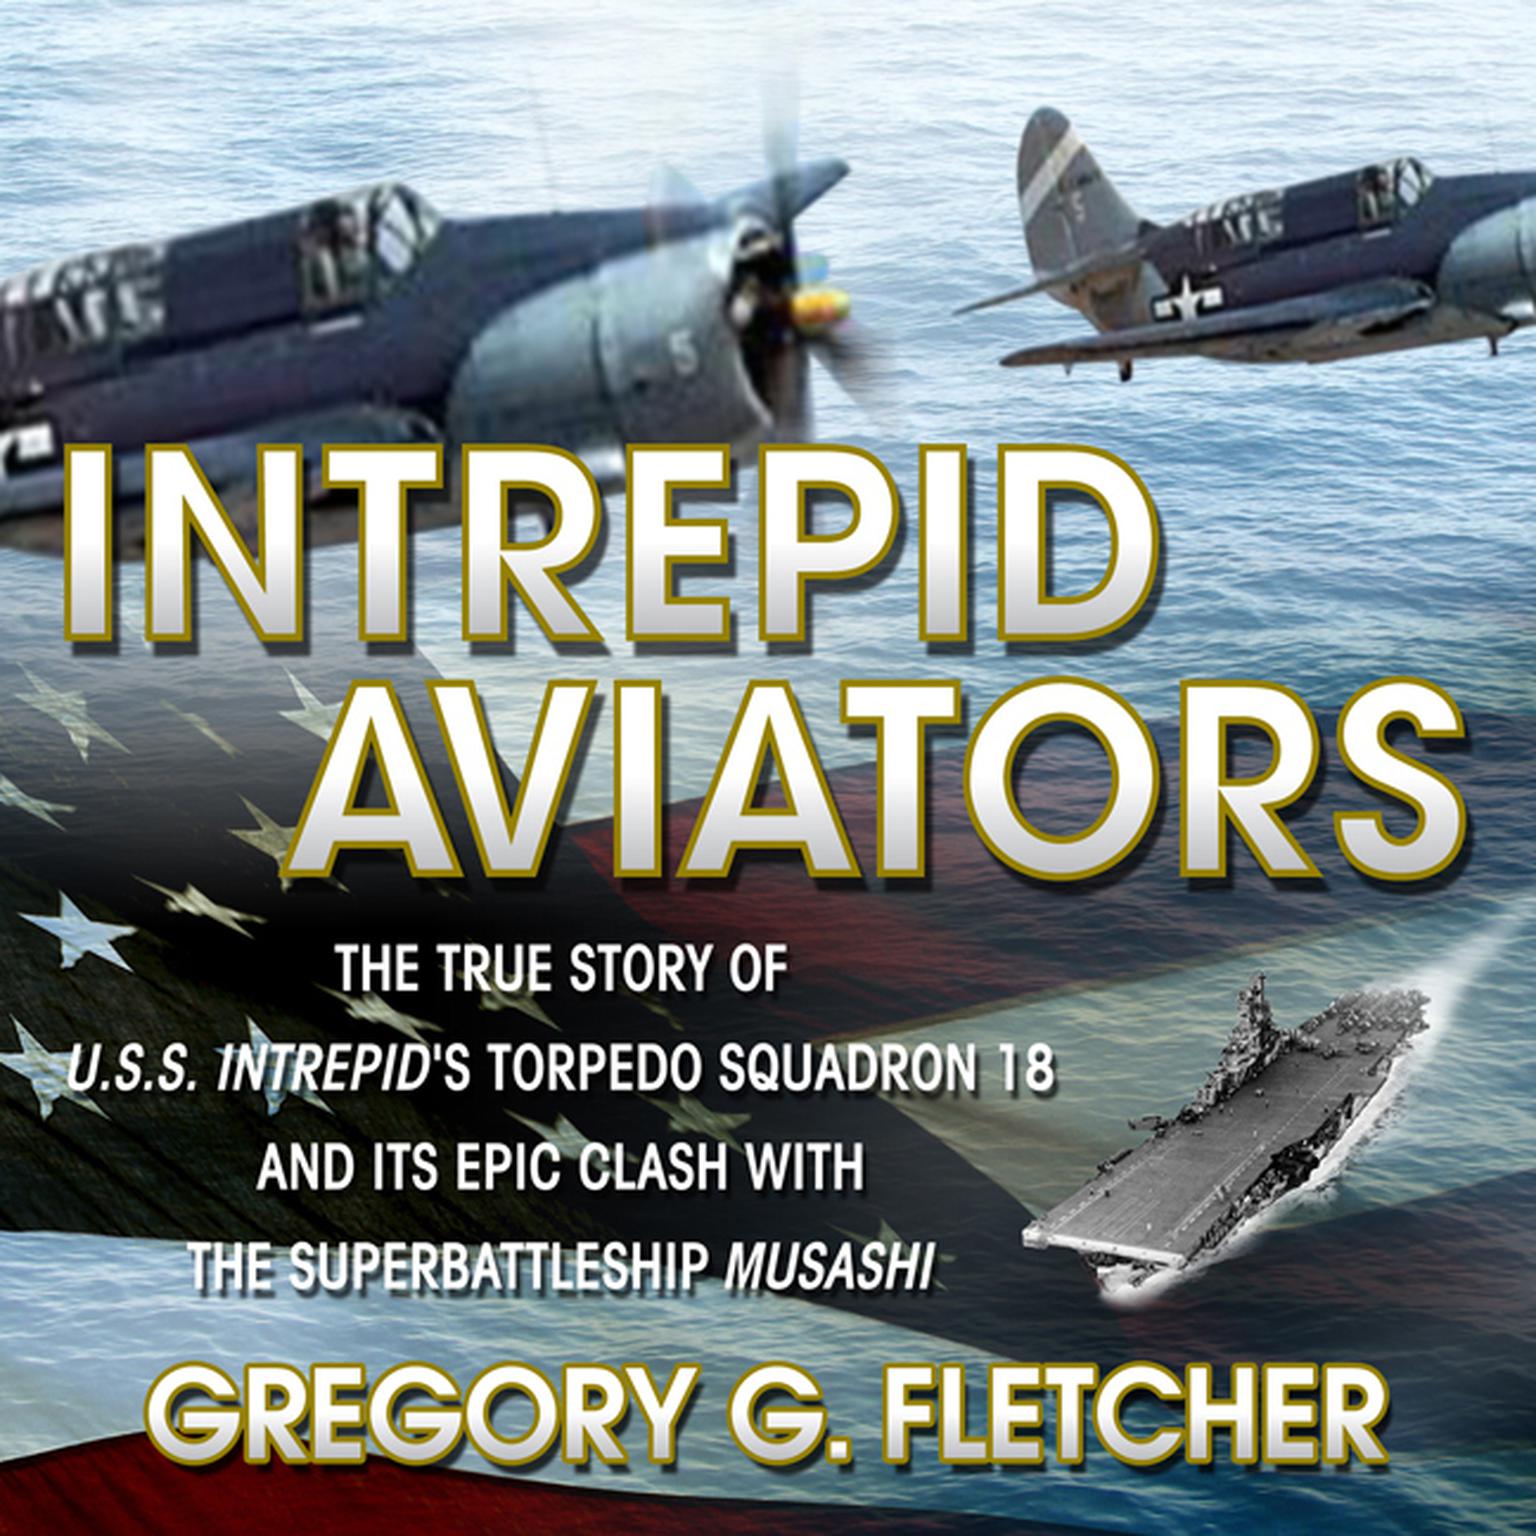 Intrepid Aviators: The True Story of U.S.S. Intrepids Torpedo Squadron 18 and Its Epic Clash With the Superbattleship Musashi Audiobook, by Gregory G Fletcher